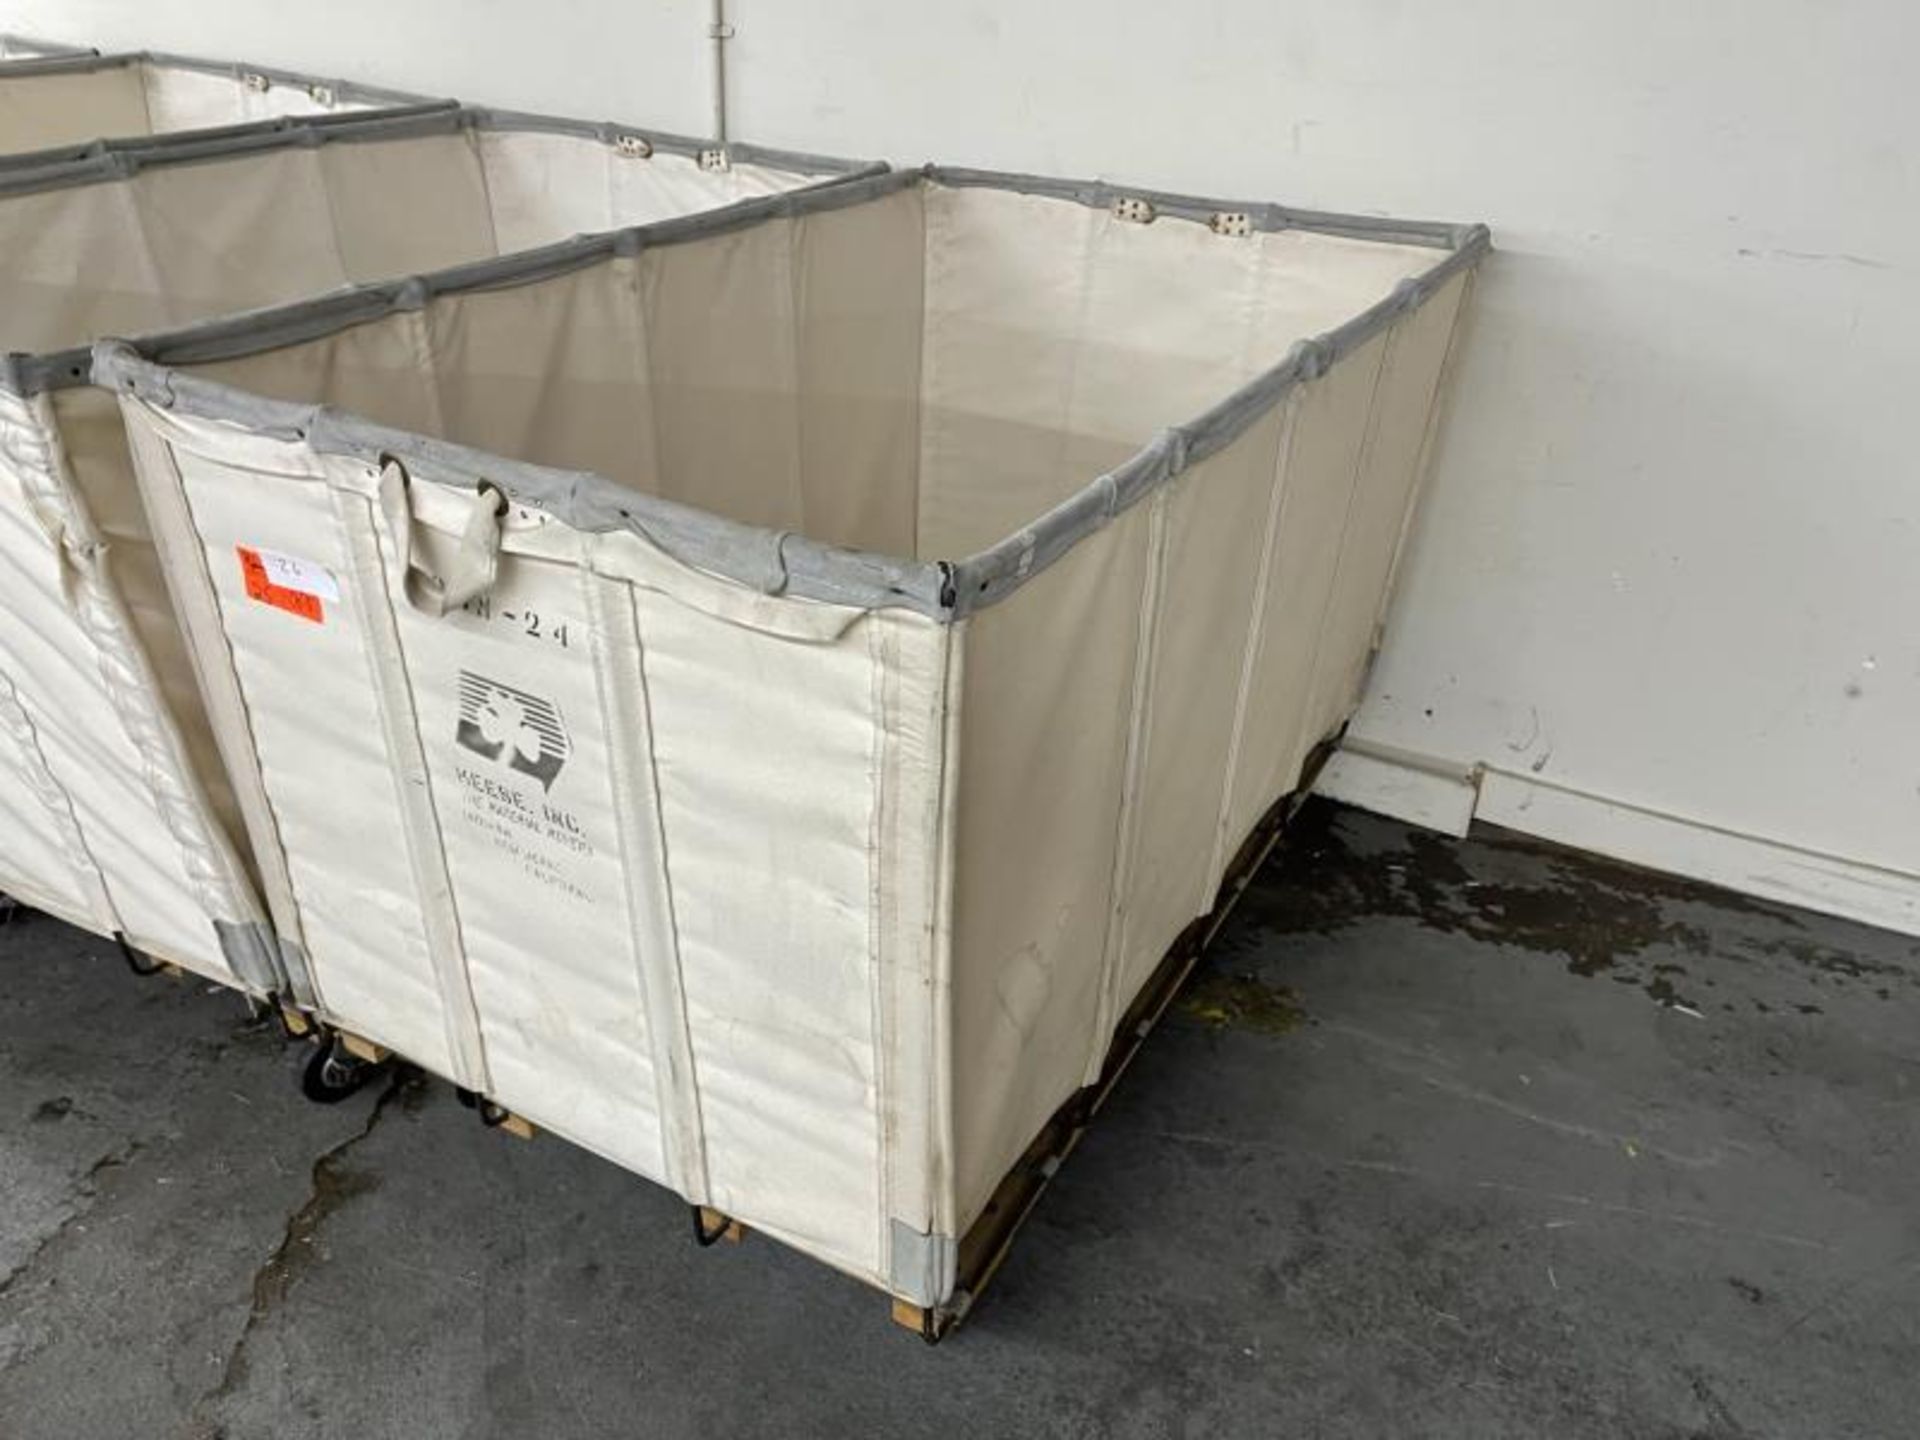 Meese Laundry Cart, 35"x55"